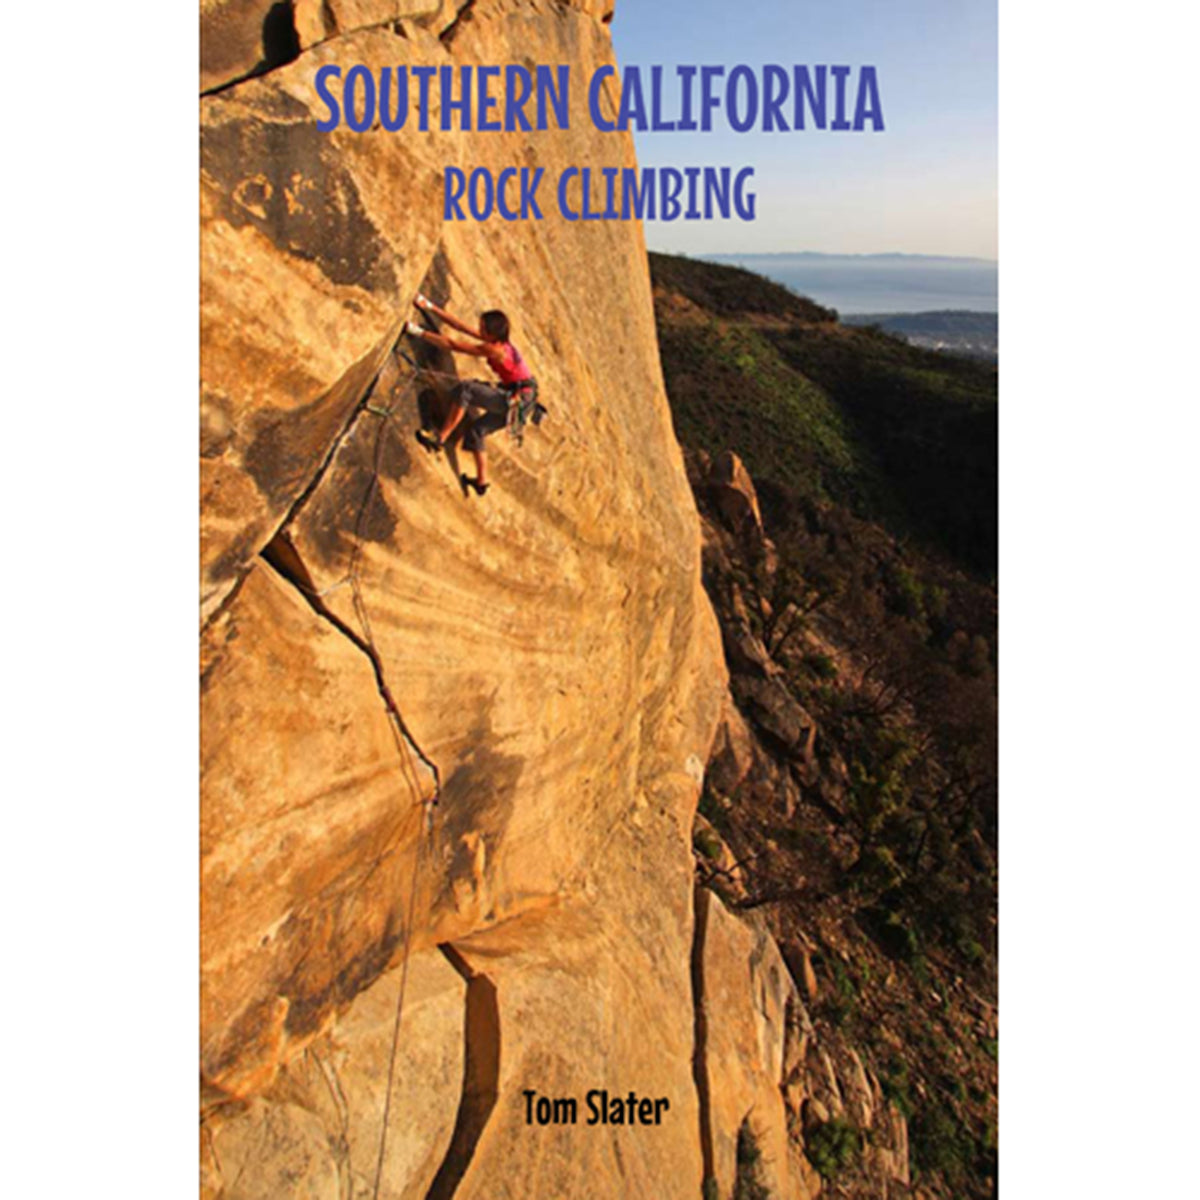 a women leads a zig zagging crack climb on the cover of the southern california rock climbing guidebook